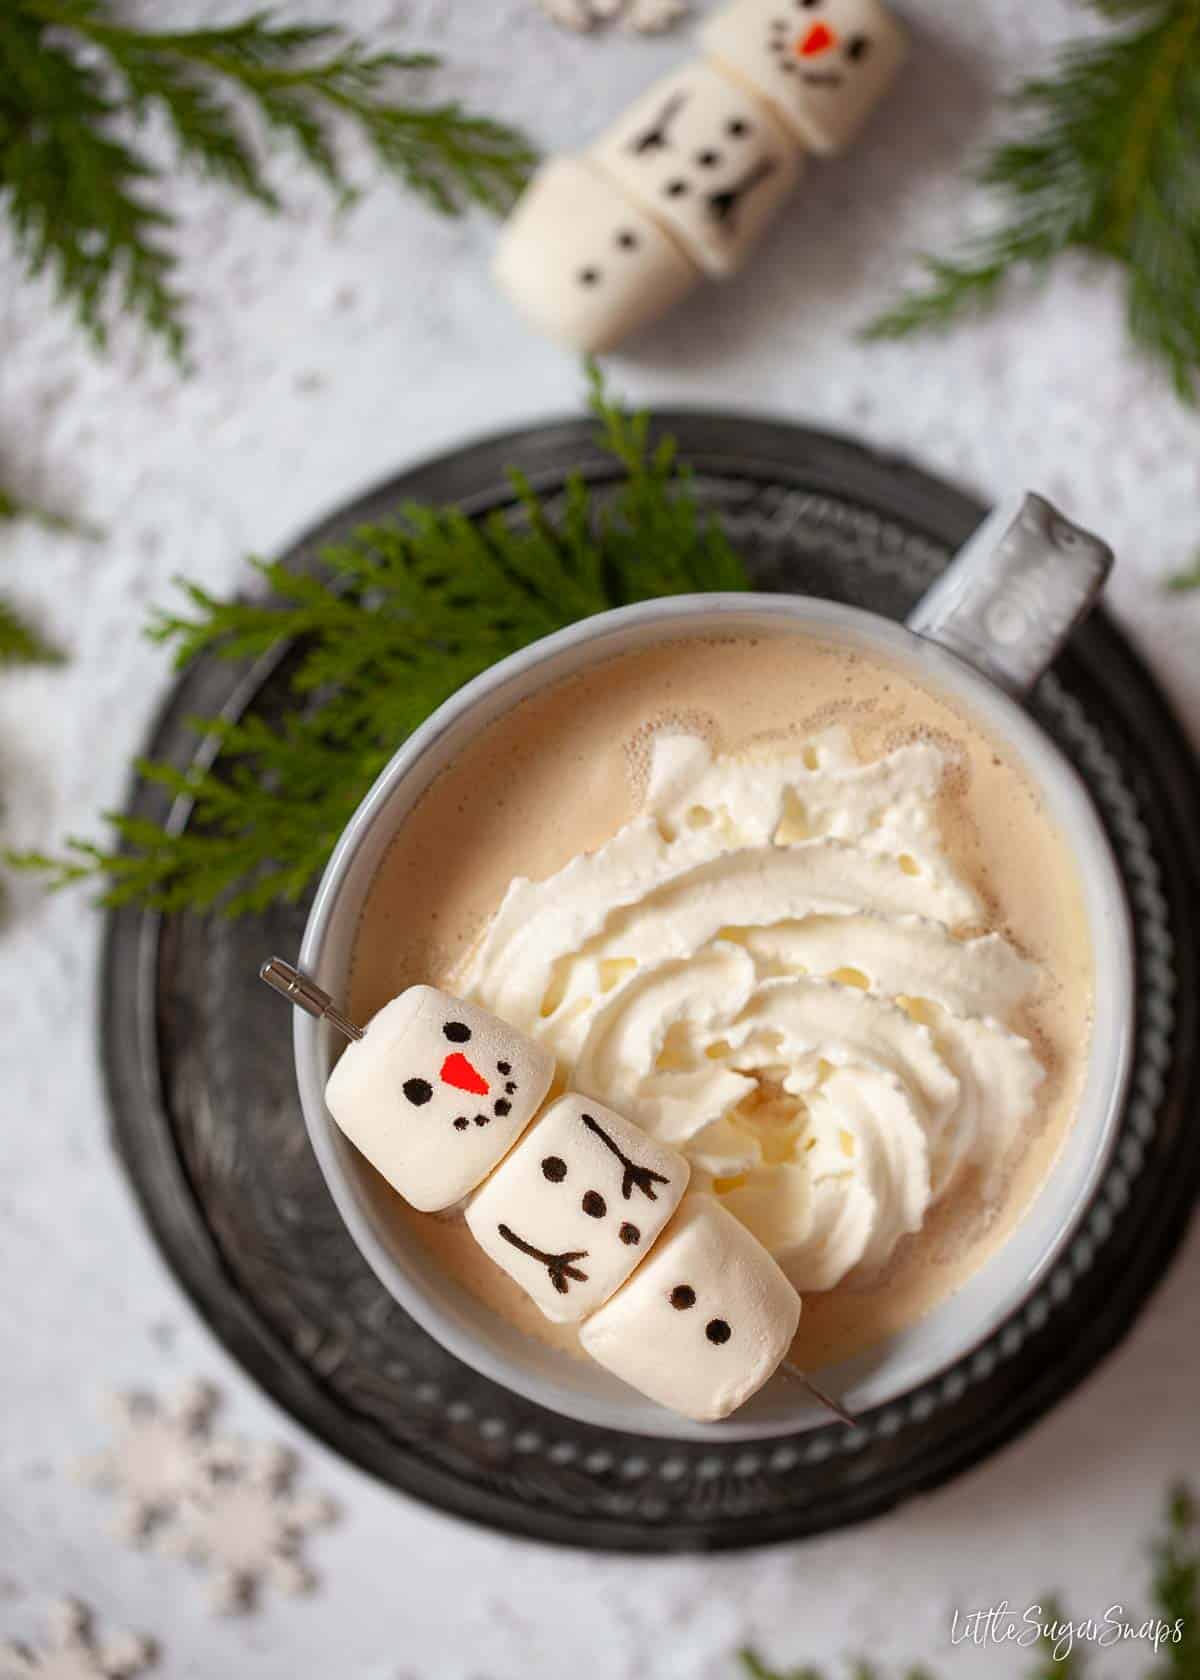 White chocolate mocha topped with whipped creamand a marshmallow snowman.